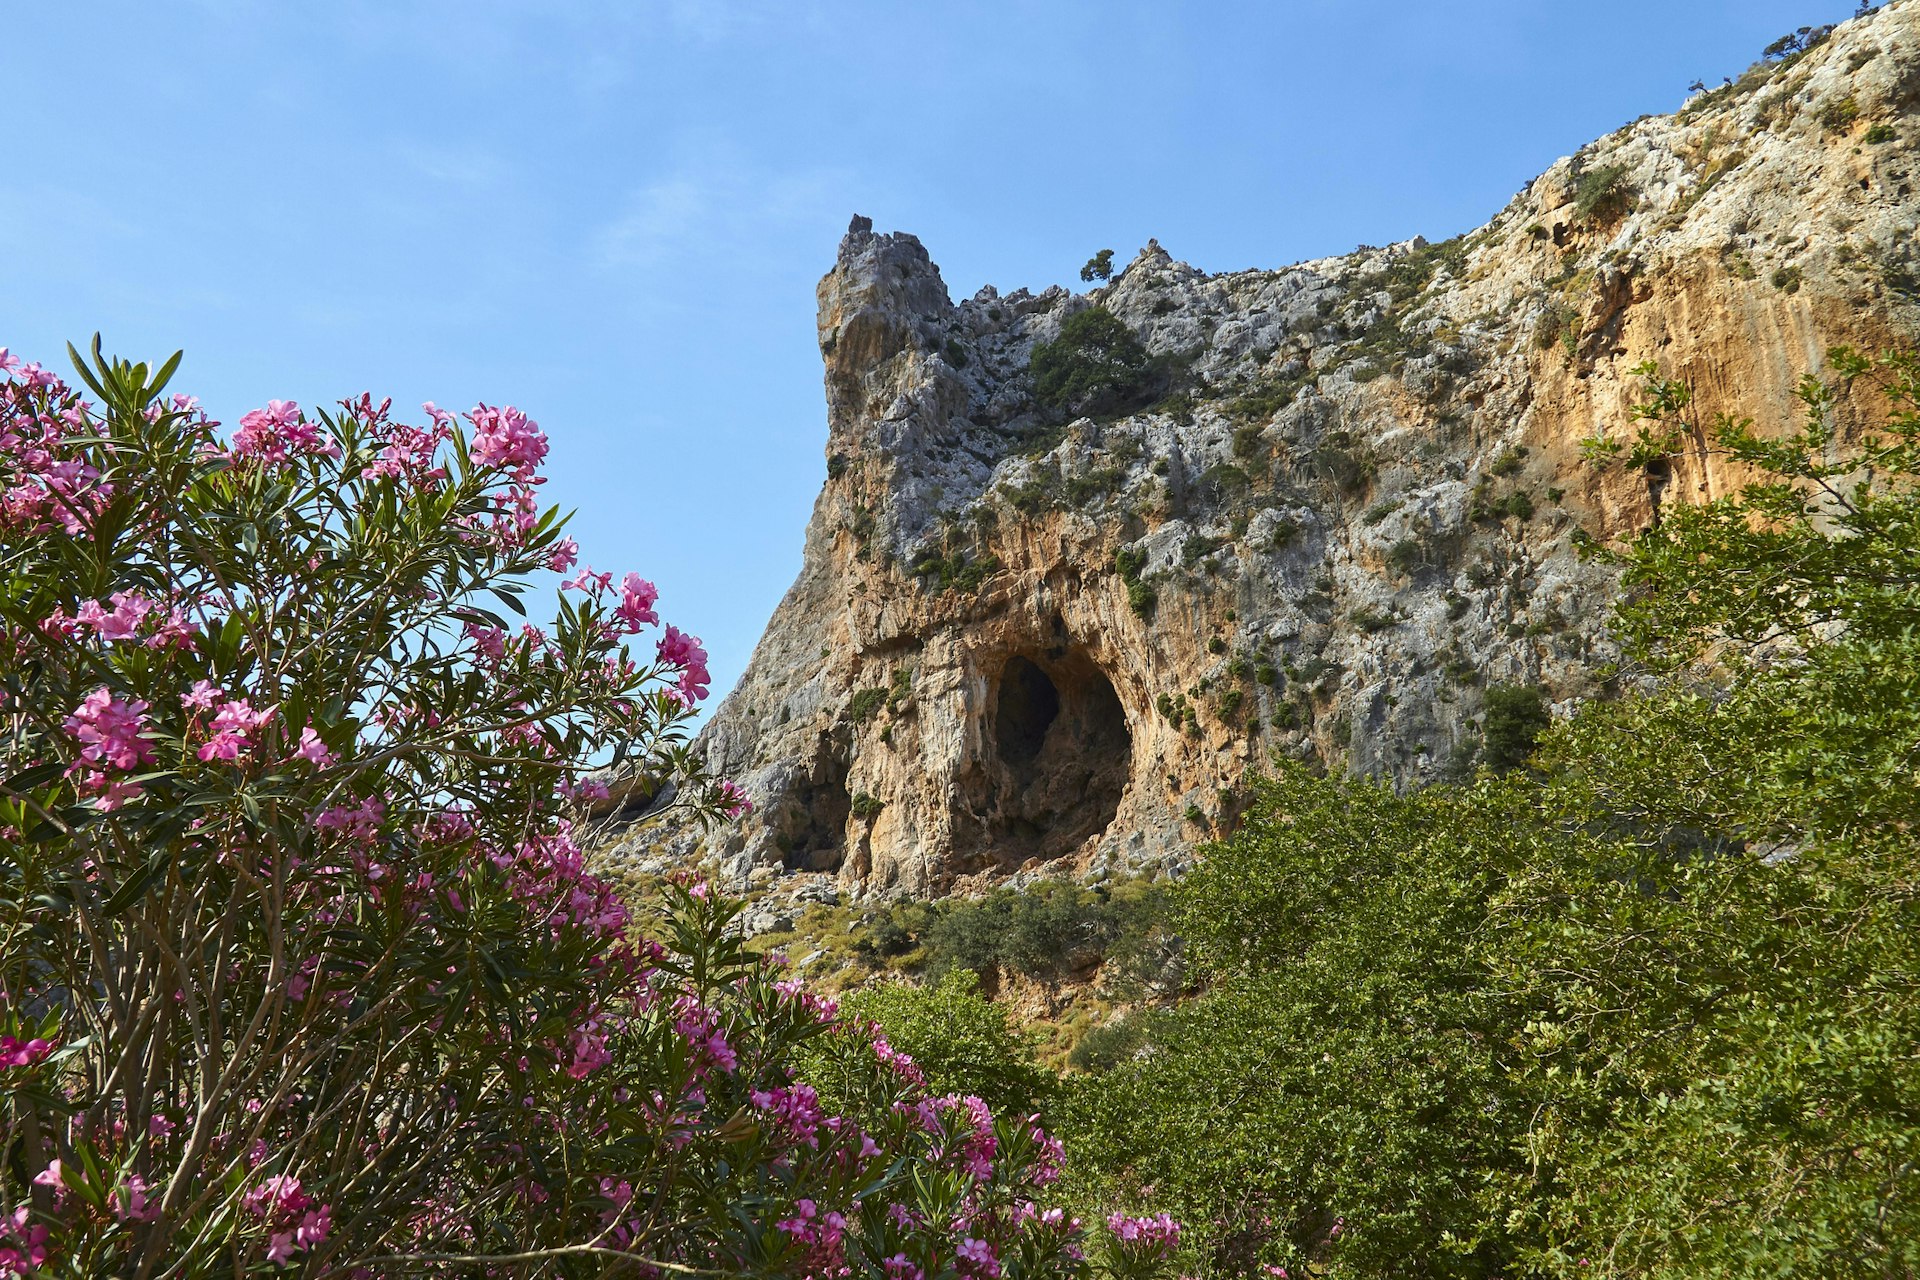 Wildflowers at the Zakros Gorge in Crete